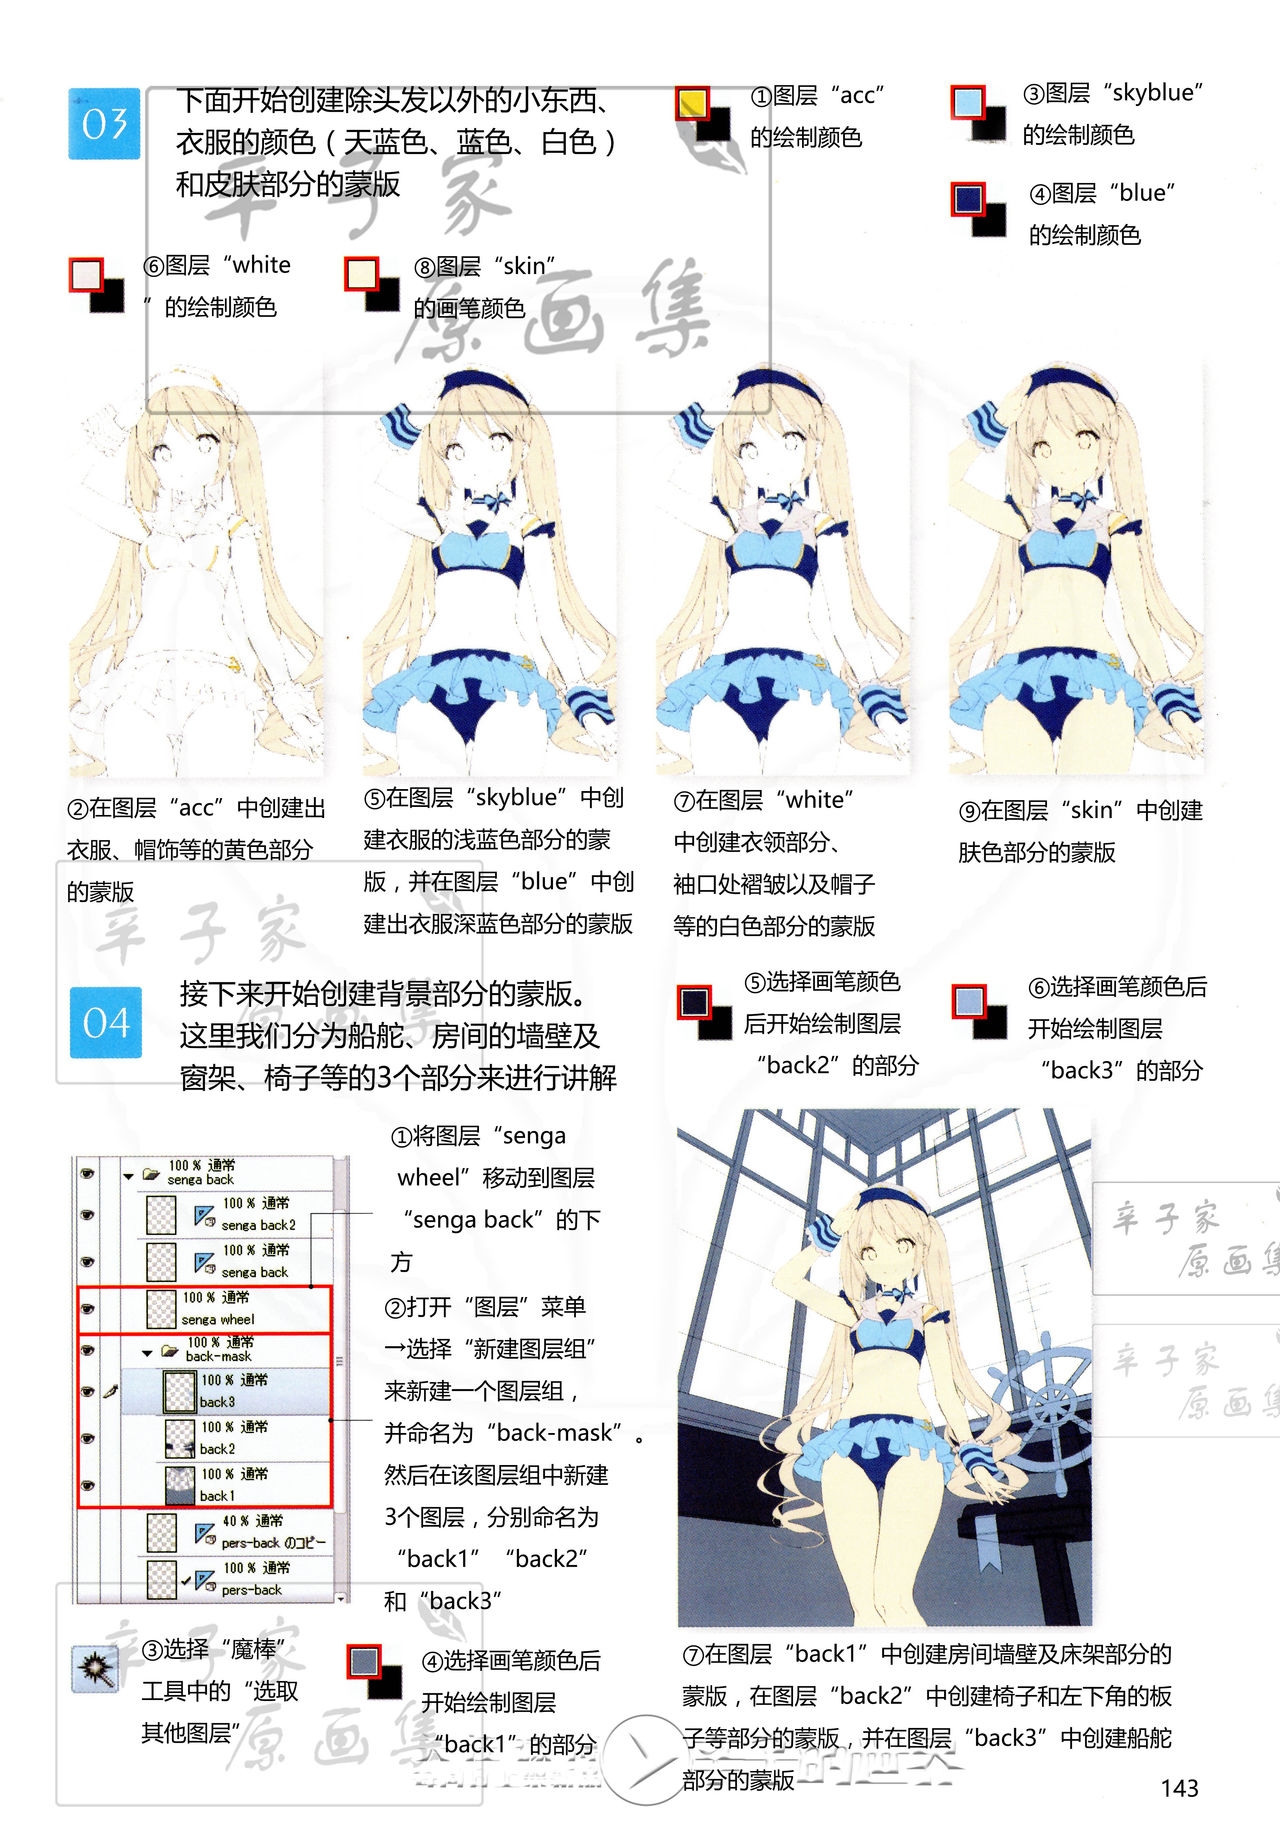 [Anmi] Lets Make ★ Character CG illustration techniques vol.9 [Chinese] 141